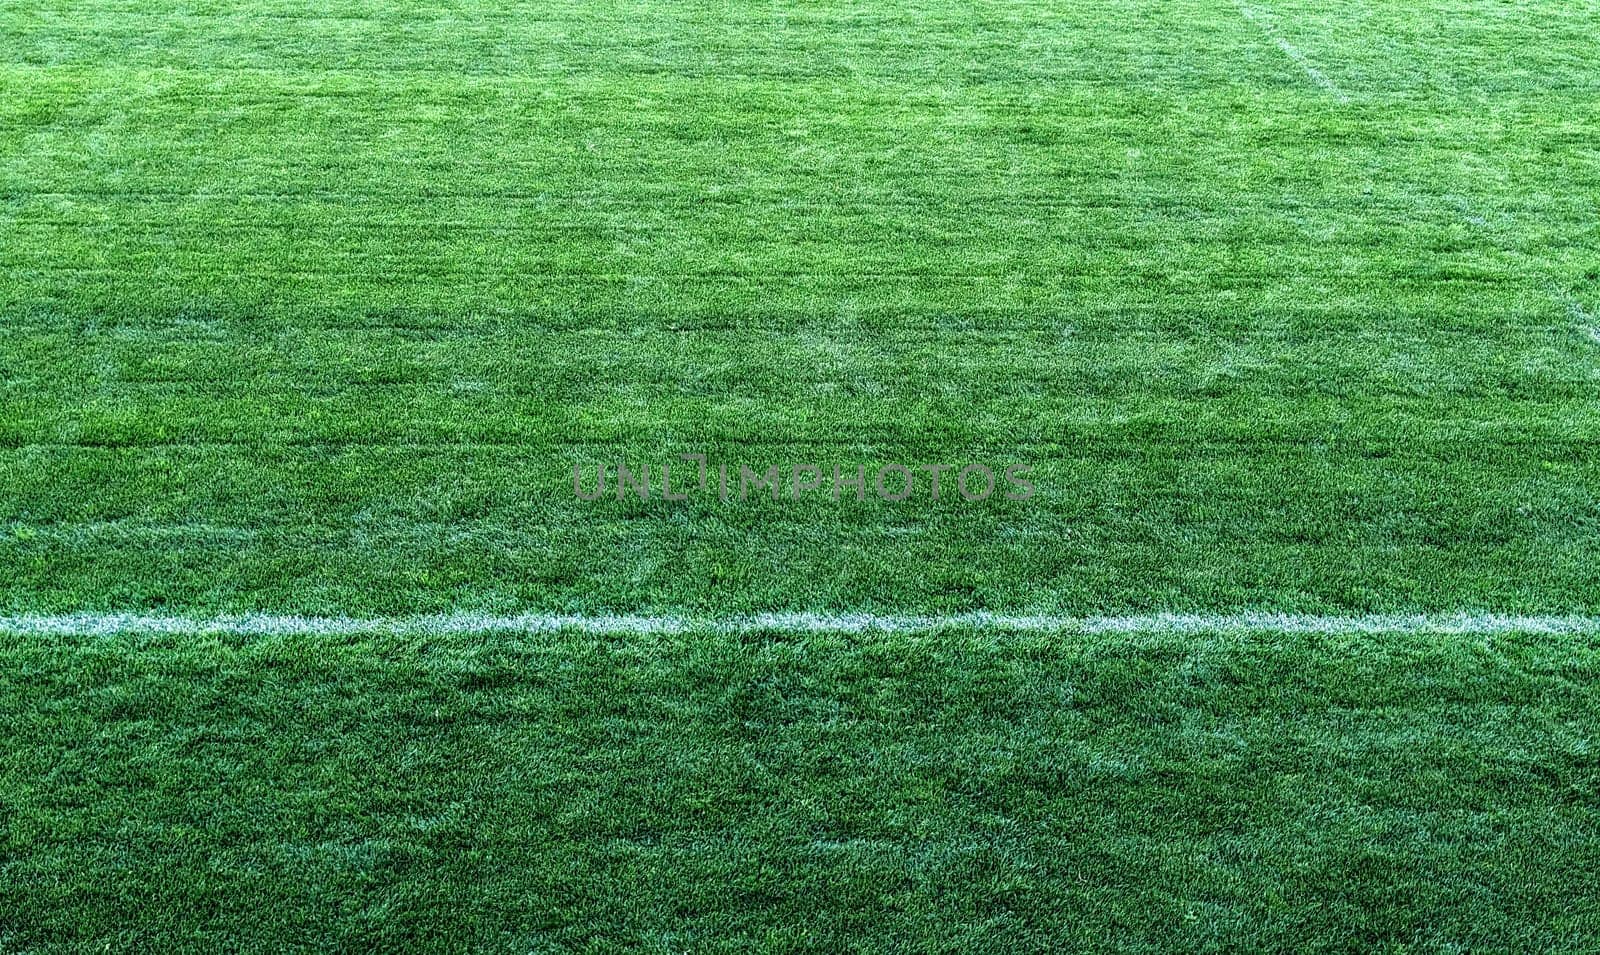 Green grass texture of a soccer or rugby field by jackreznor